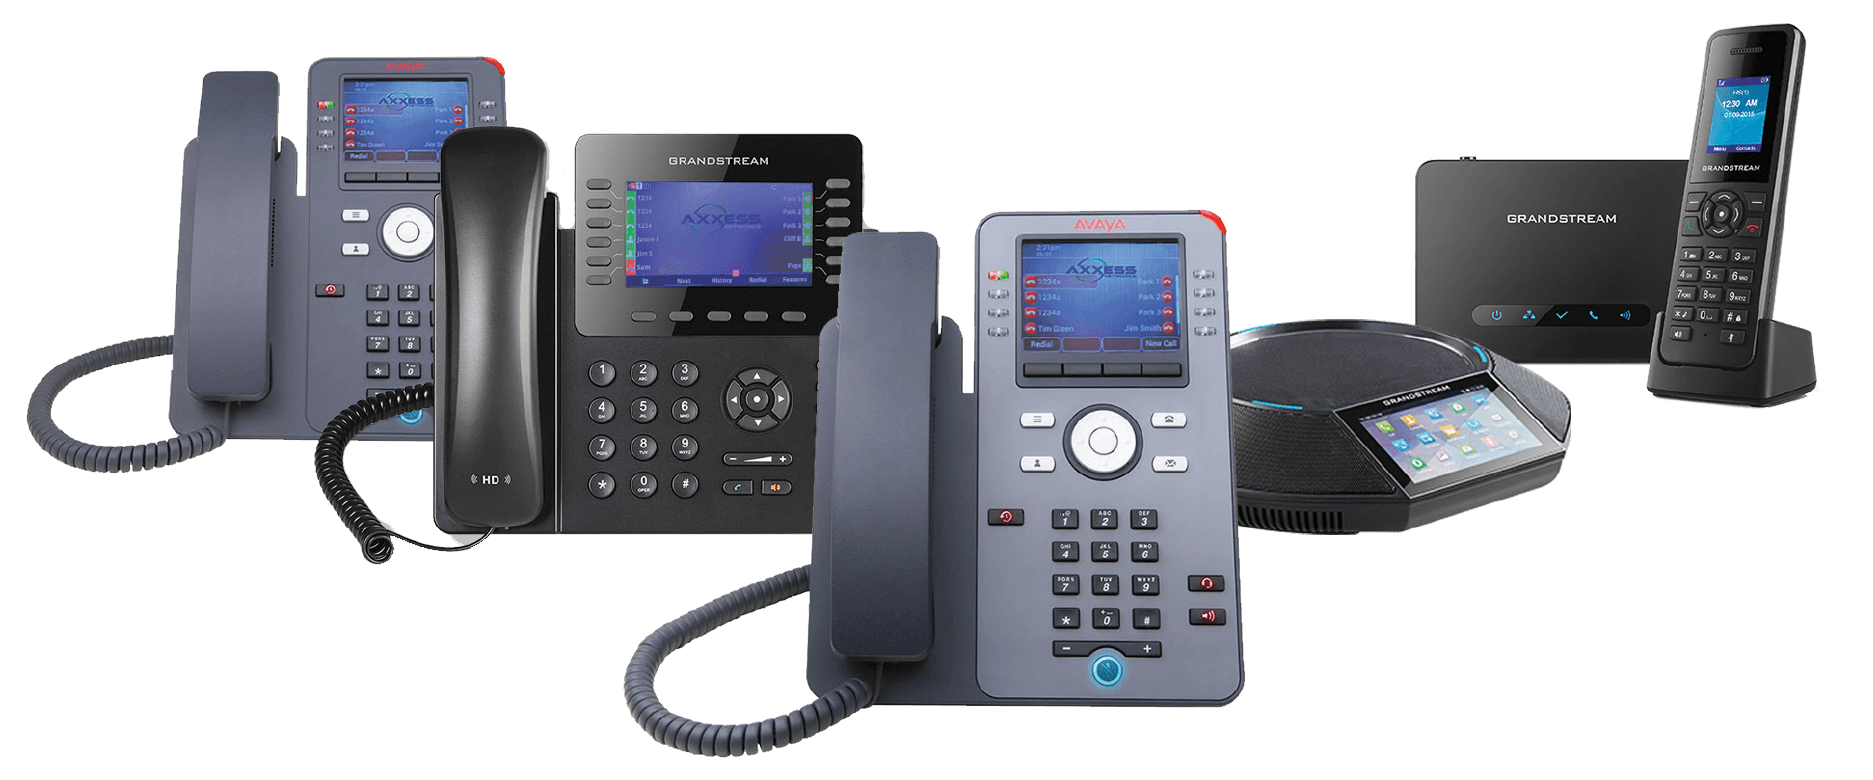 Phones for unified communications from Doceo